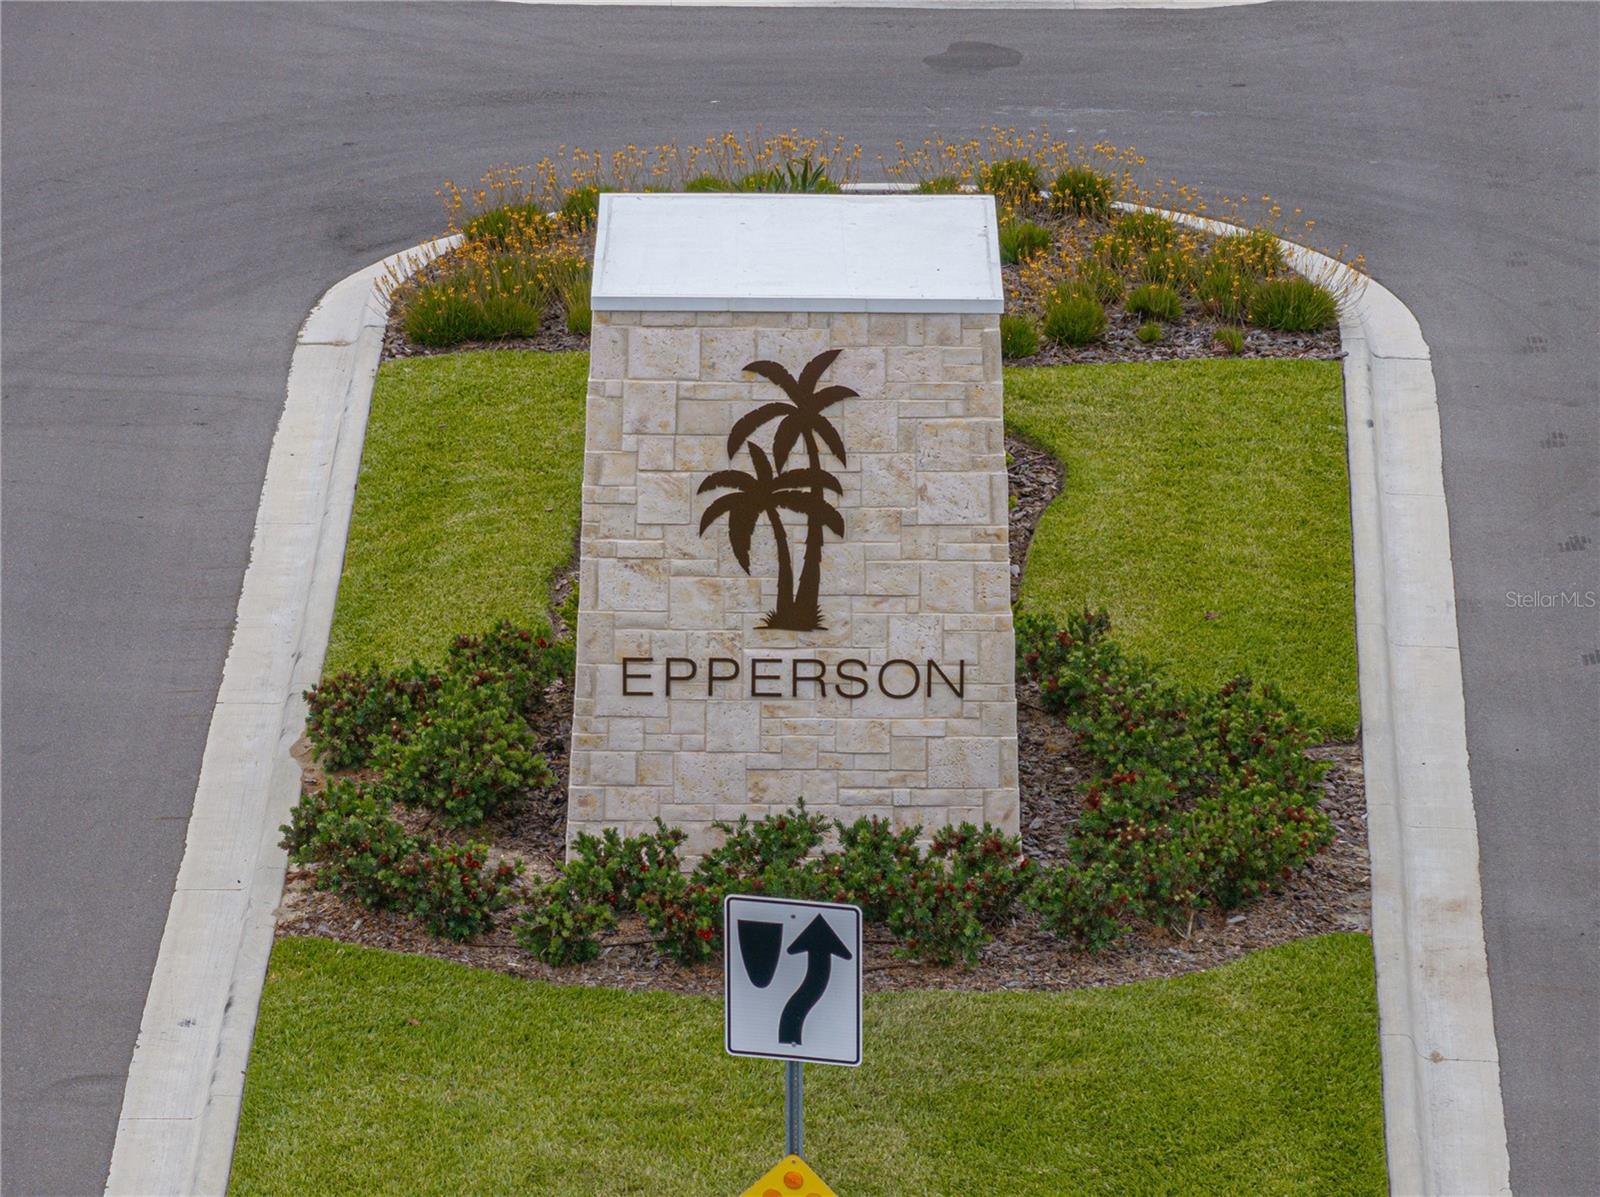 Main Epperson signage